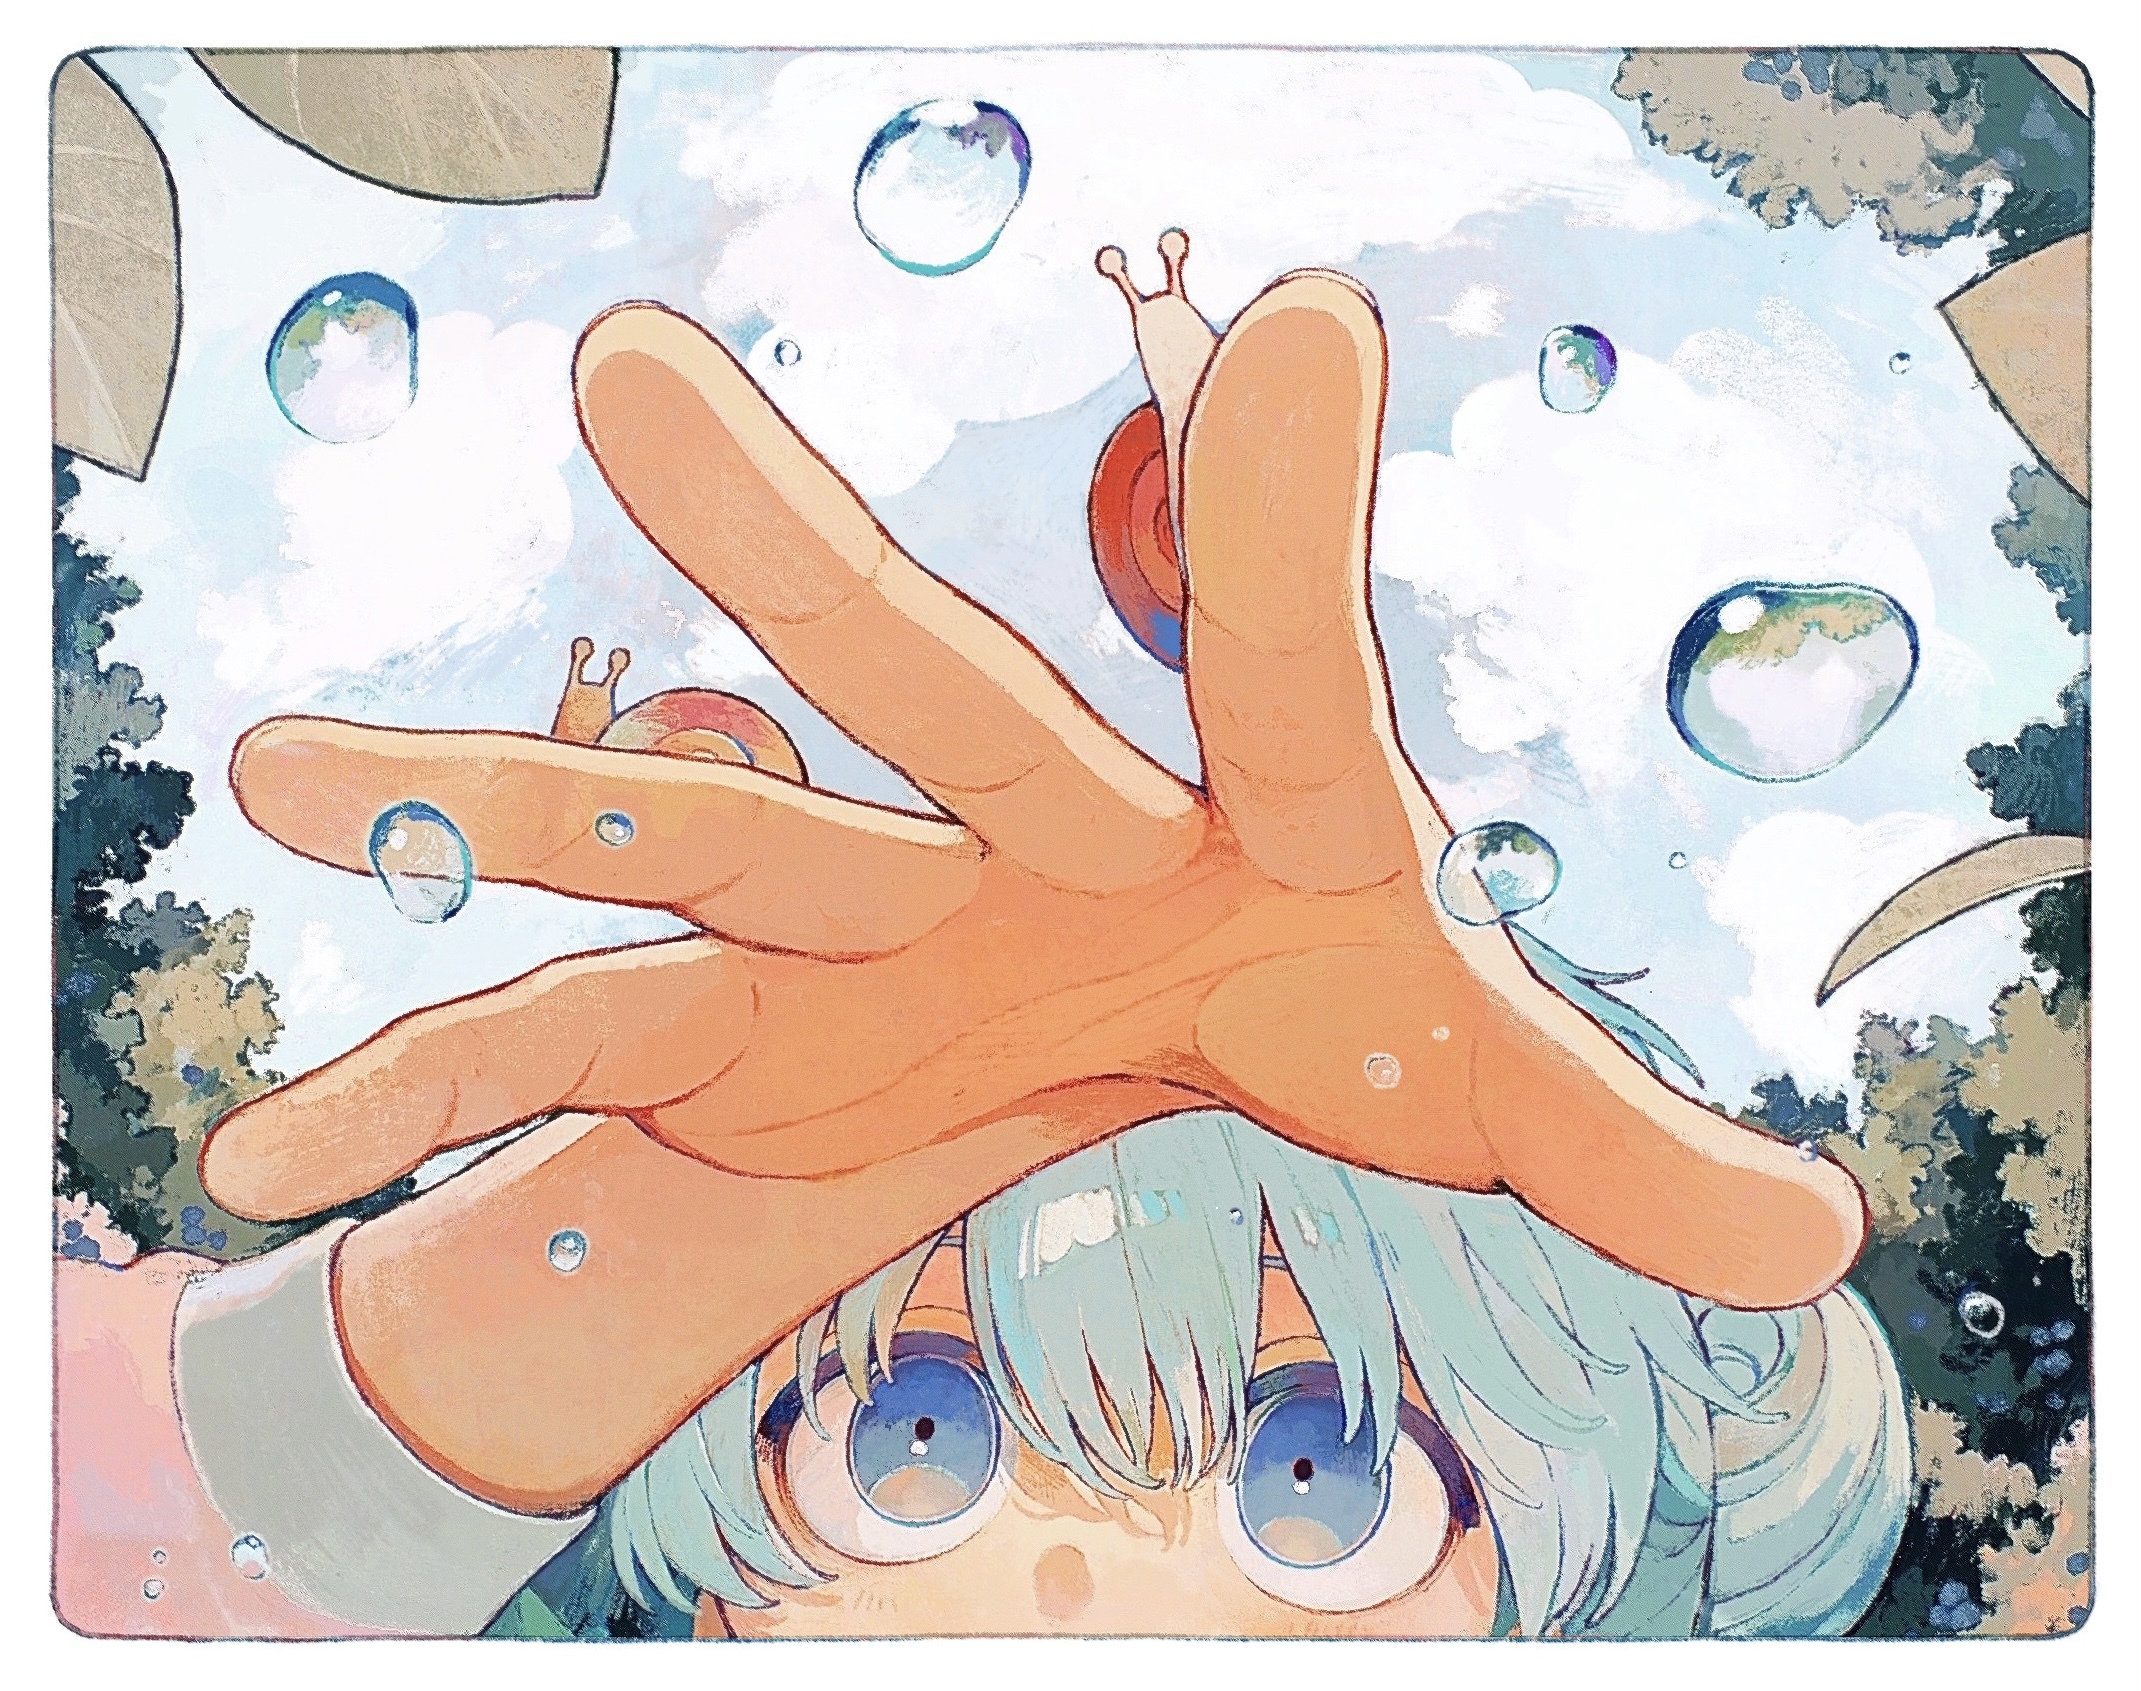 Anime 2141x1691 Marukogedago anime girls low-angle worm's eye view animals water drops leaves trees snail closeup looking up blue hair blue eyes sky arms reaching hands outdoors fingers hairbun